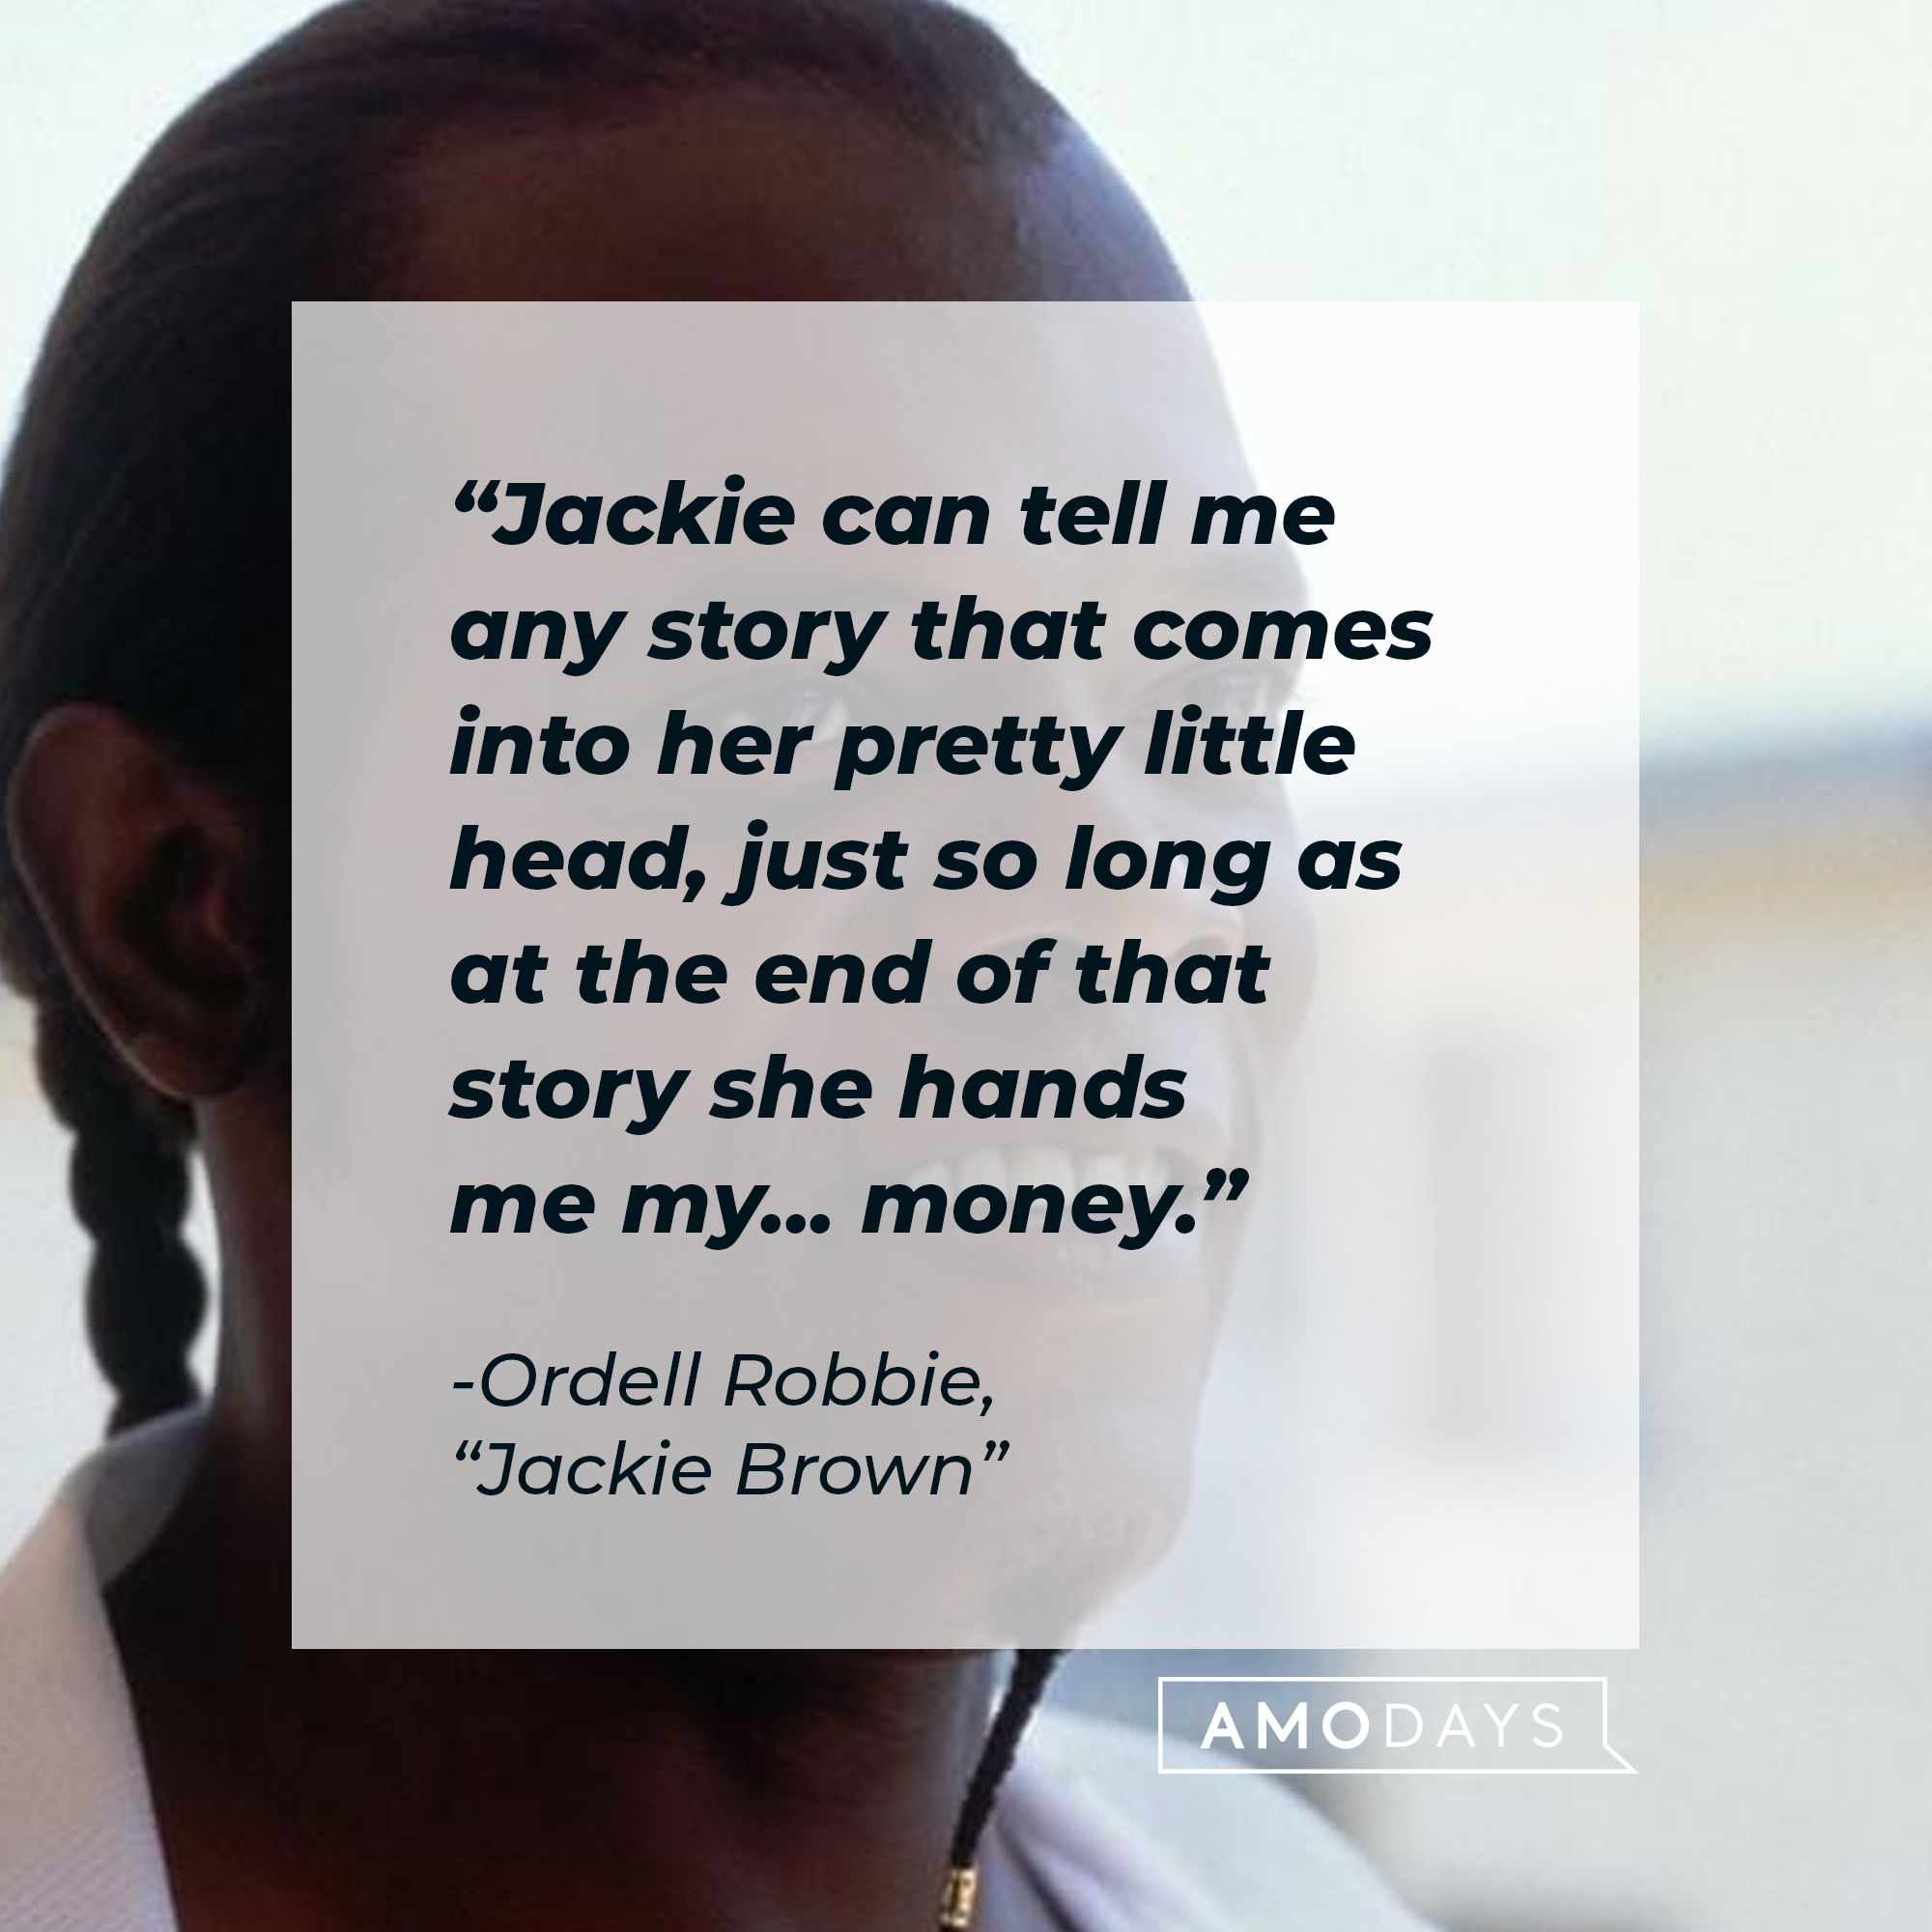 Ordell Robbie's quote" "Jackie can tell me any story that comes into her pretty little head, just so long as at the end of that story she hands me my... money." | Source: Facebook/JackieBrownMovie